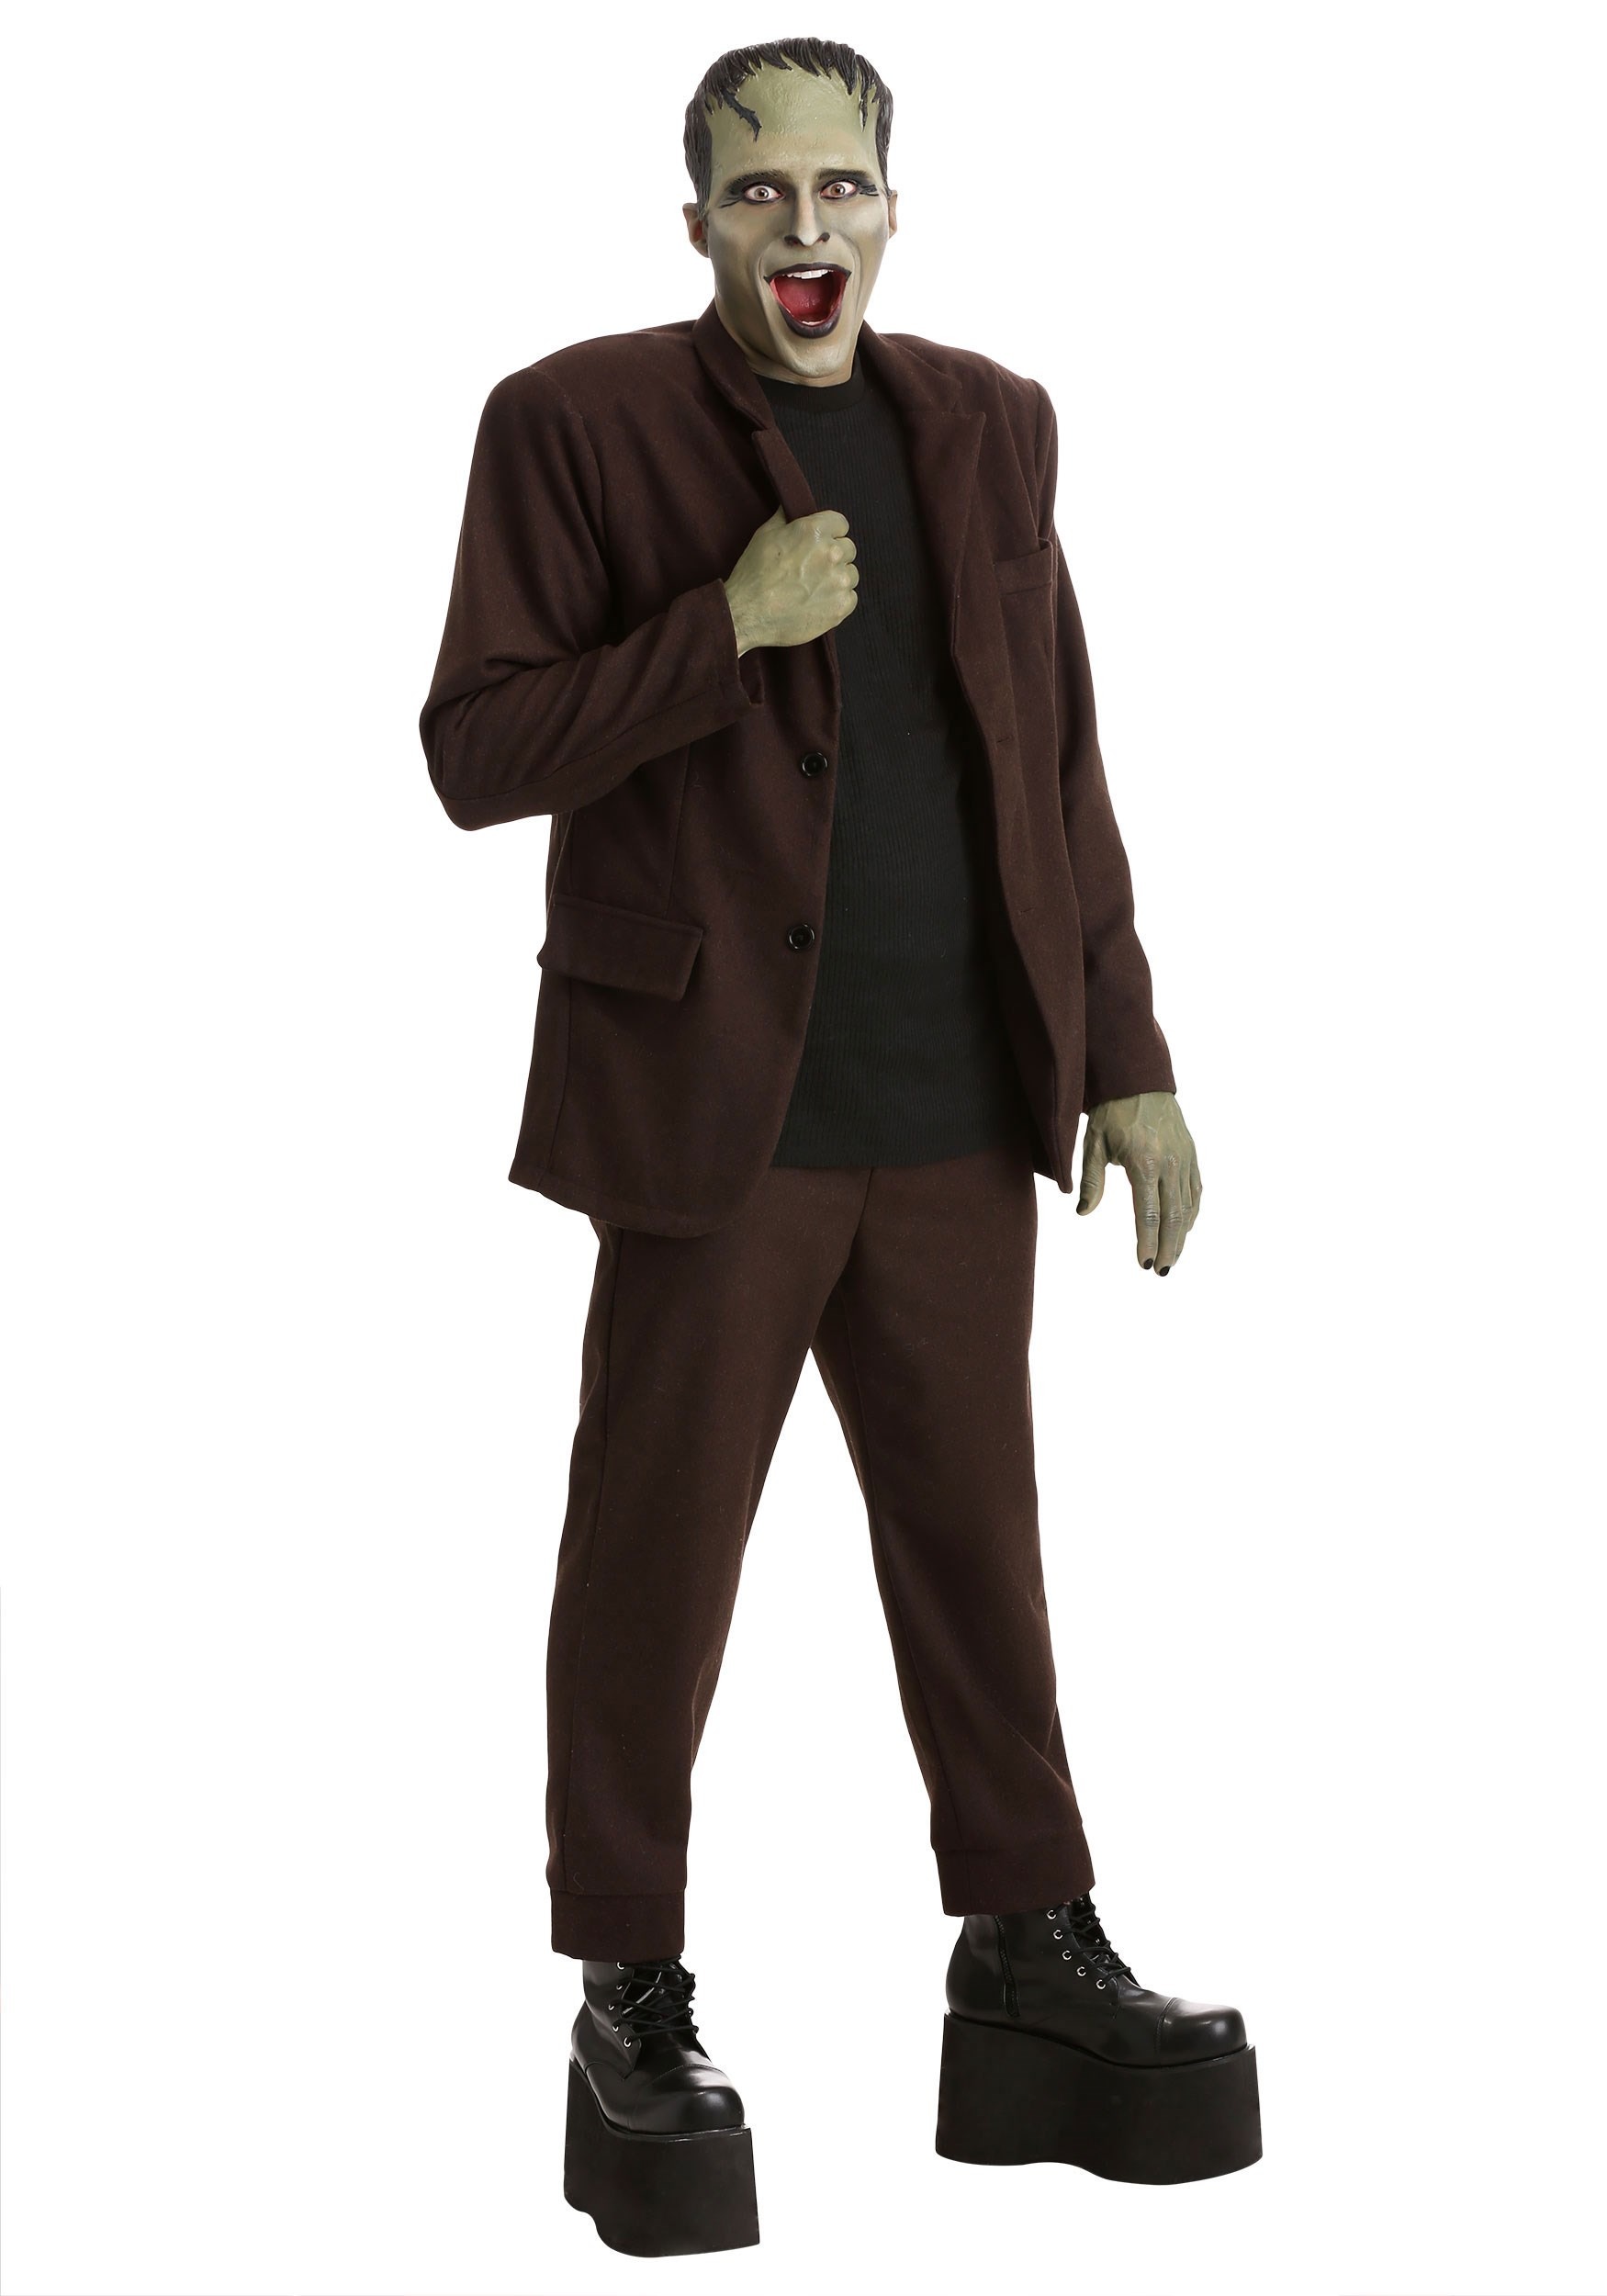 Photos - Fancy Dress FUN Costumes Herman Munster Plus Size The Munsters Costume Black/Brown